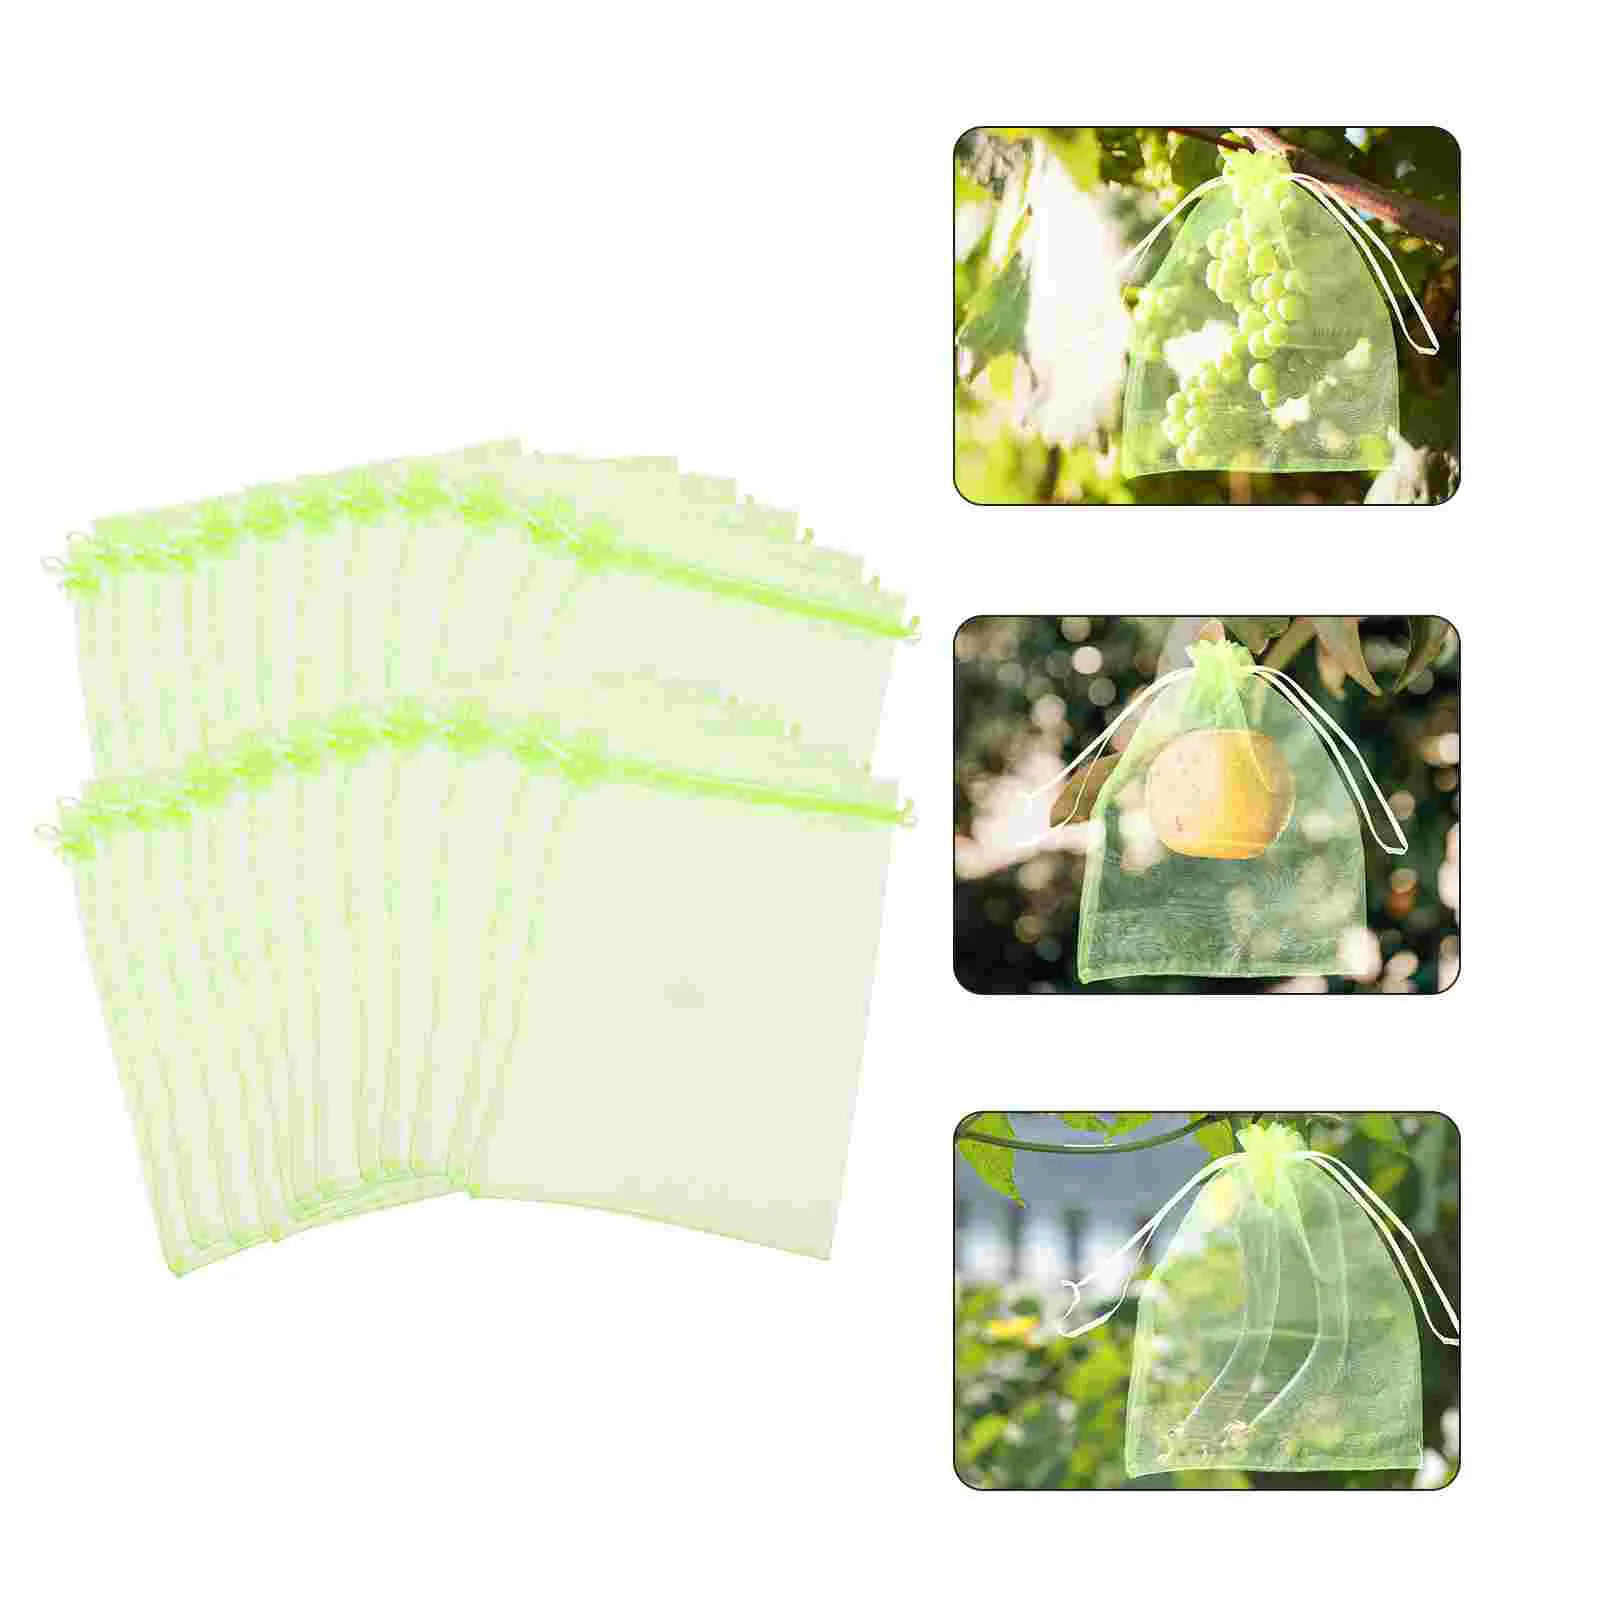 

Fruit Netting Protectiongarden Net Mesh Coverfor Barrier Tree Grape Trees Bird Insect Exclusion Mango Fine Bugs Drawstring Nylon